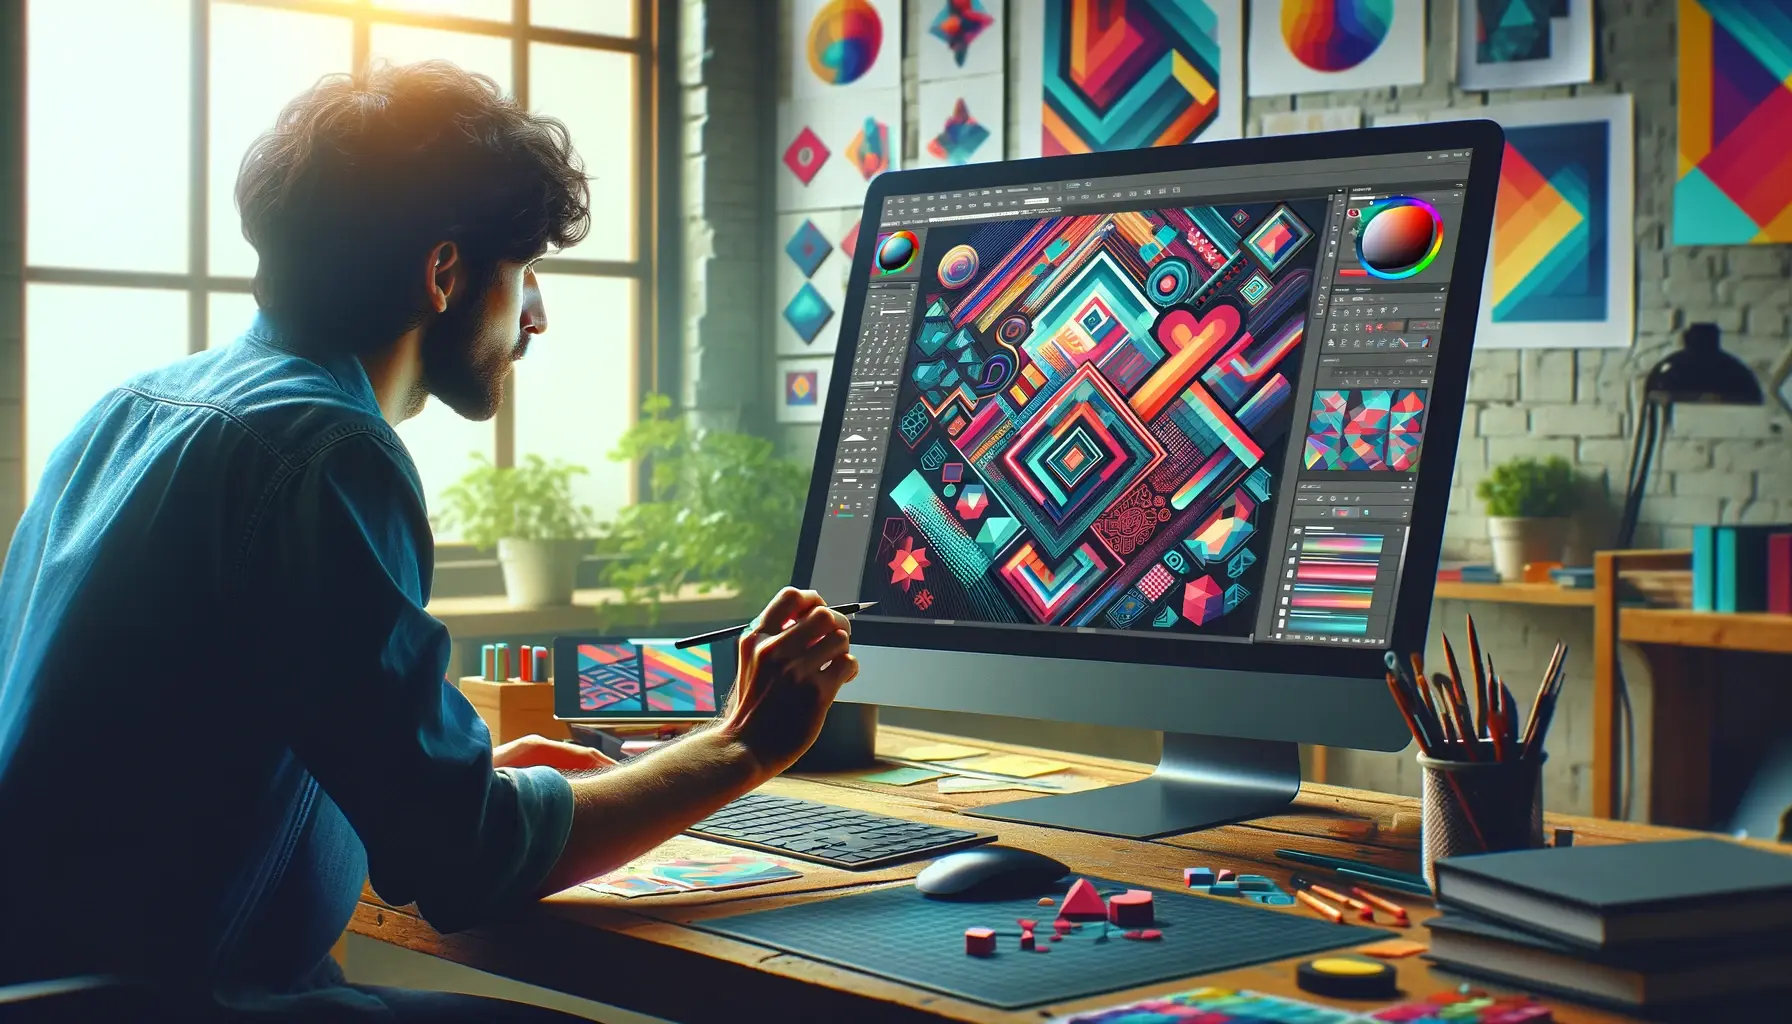 A digital artist uses the shape tool in Photoshop to manipulate shape layers on a computer, crafting complex designs in a vibrant workspace.